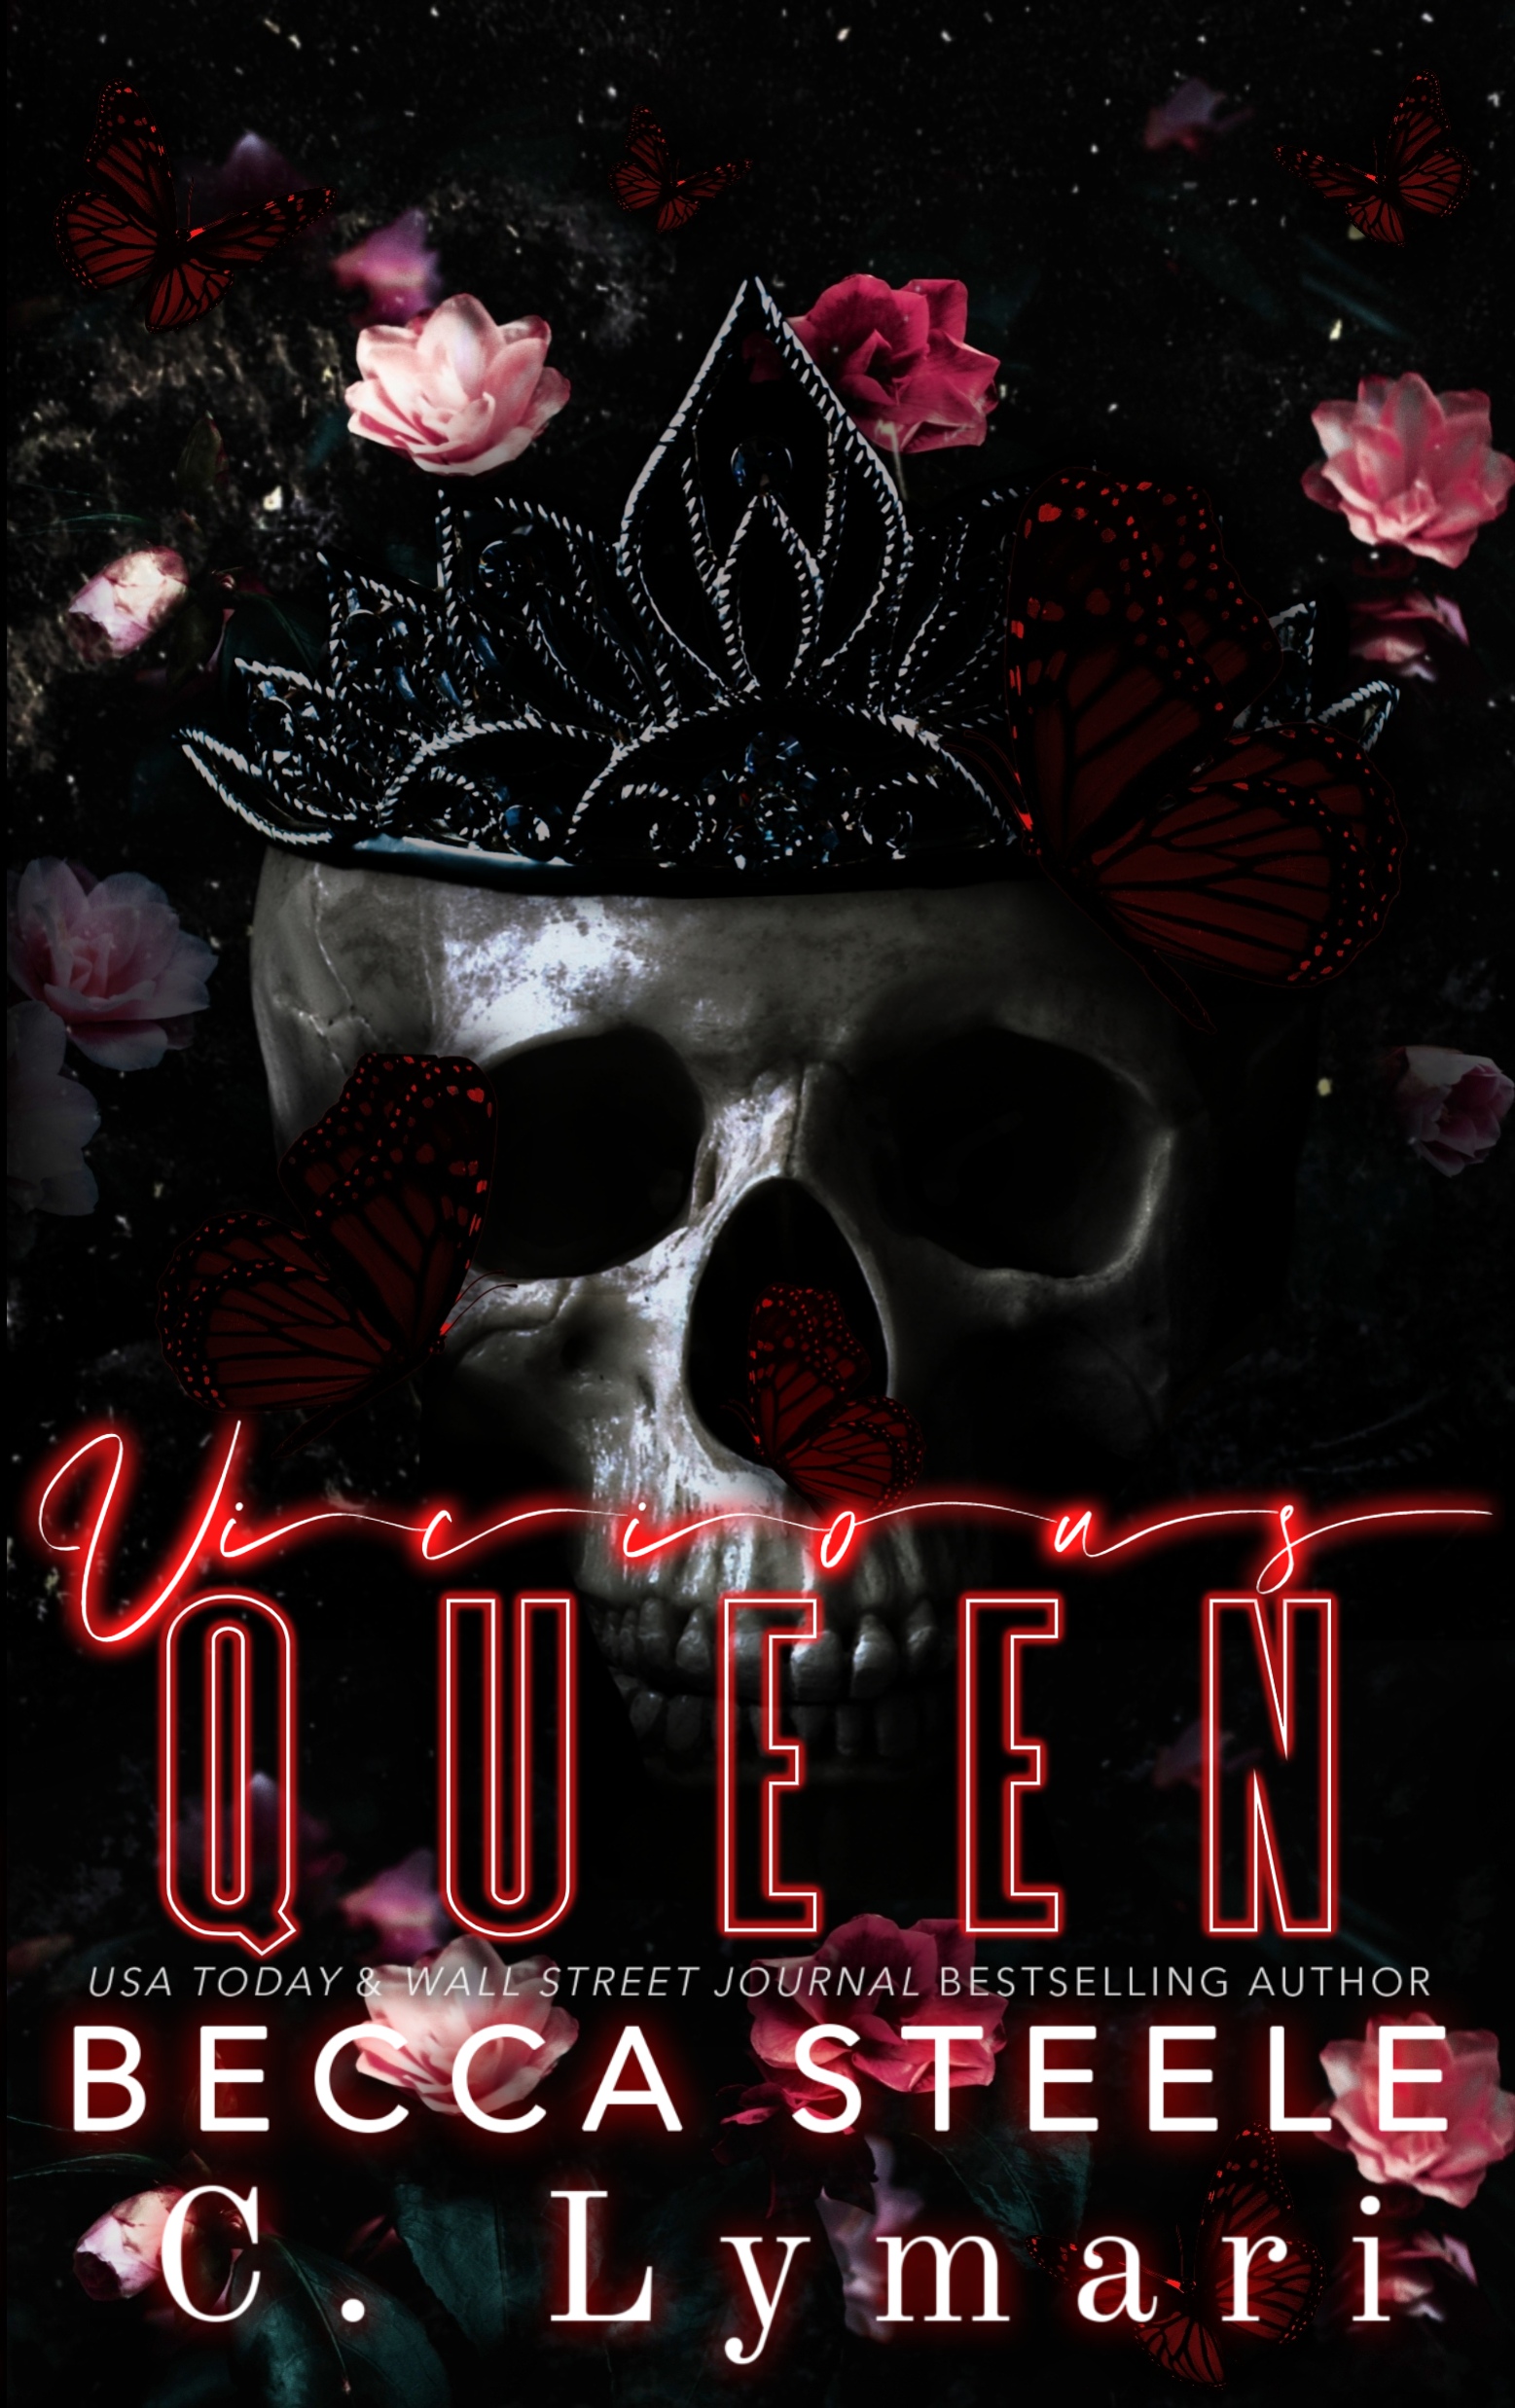 VICIOUS QUEEN by Becca Steele & C. Lymari [Cover Reveal]